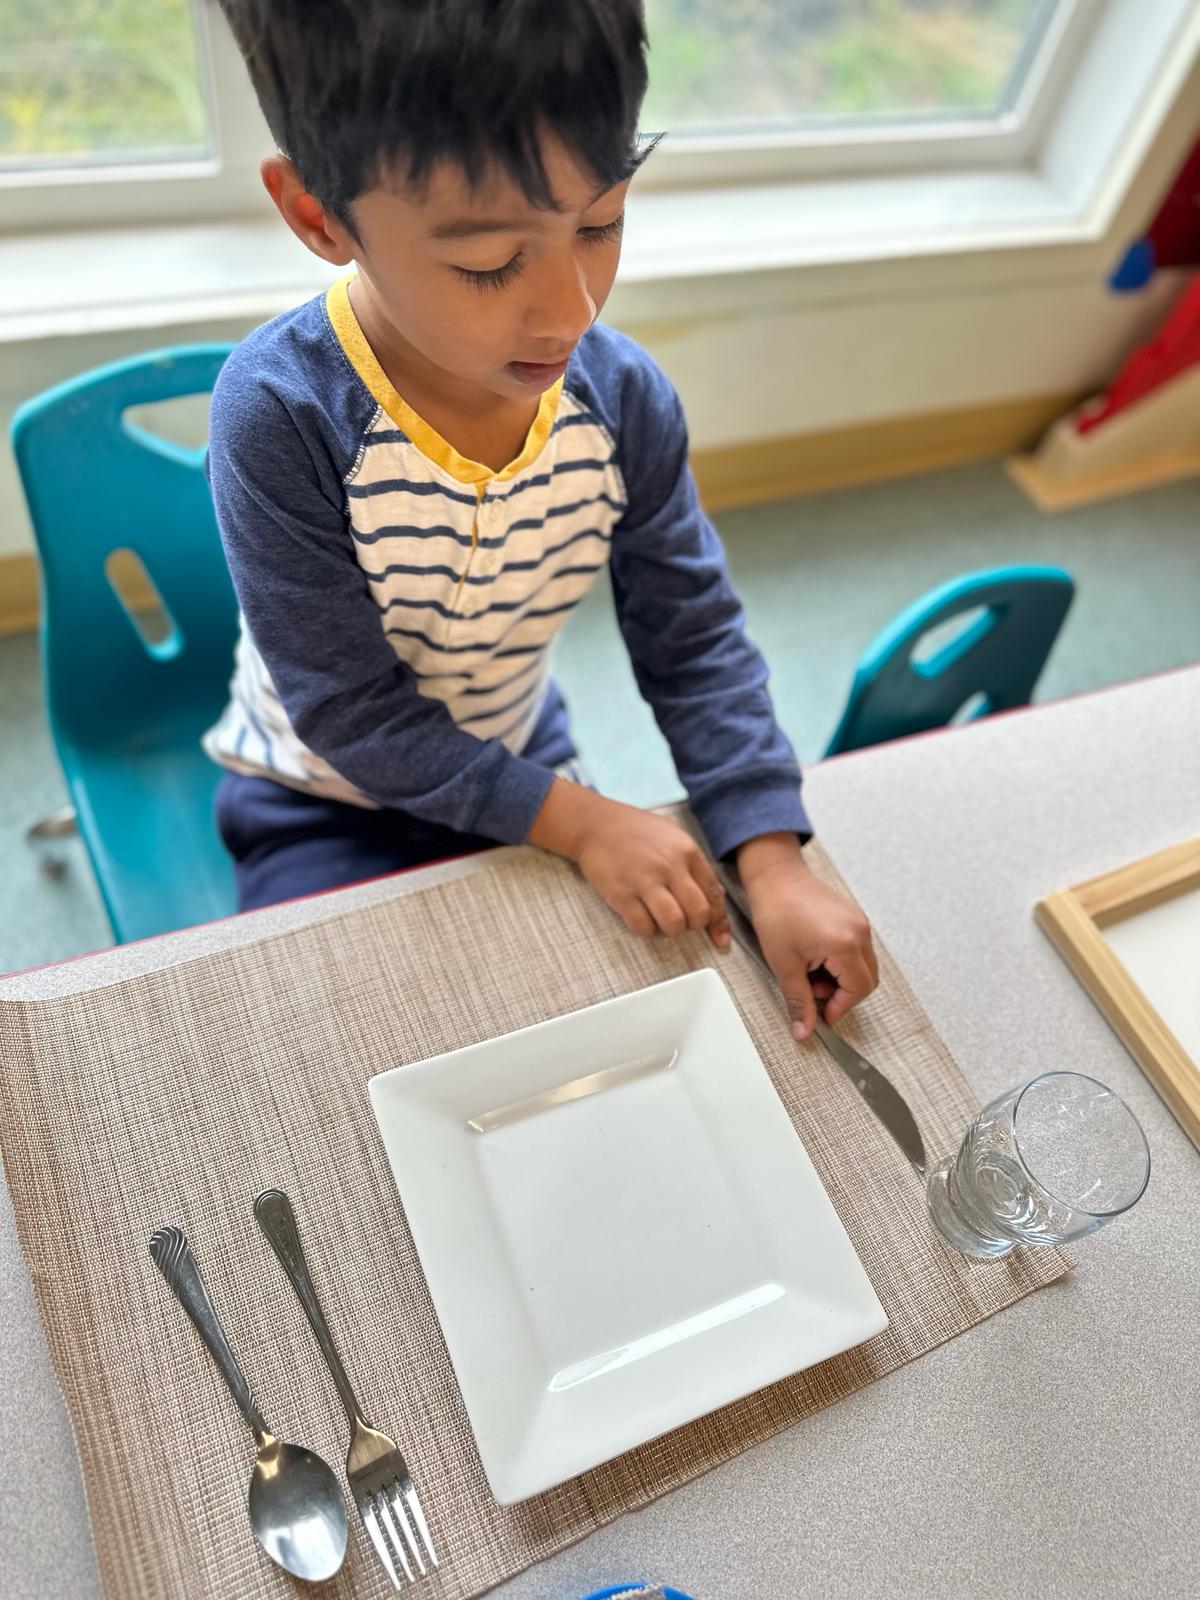 A boy practicing practical life skills by setting the table with cutlery, a plate and a glass.